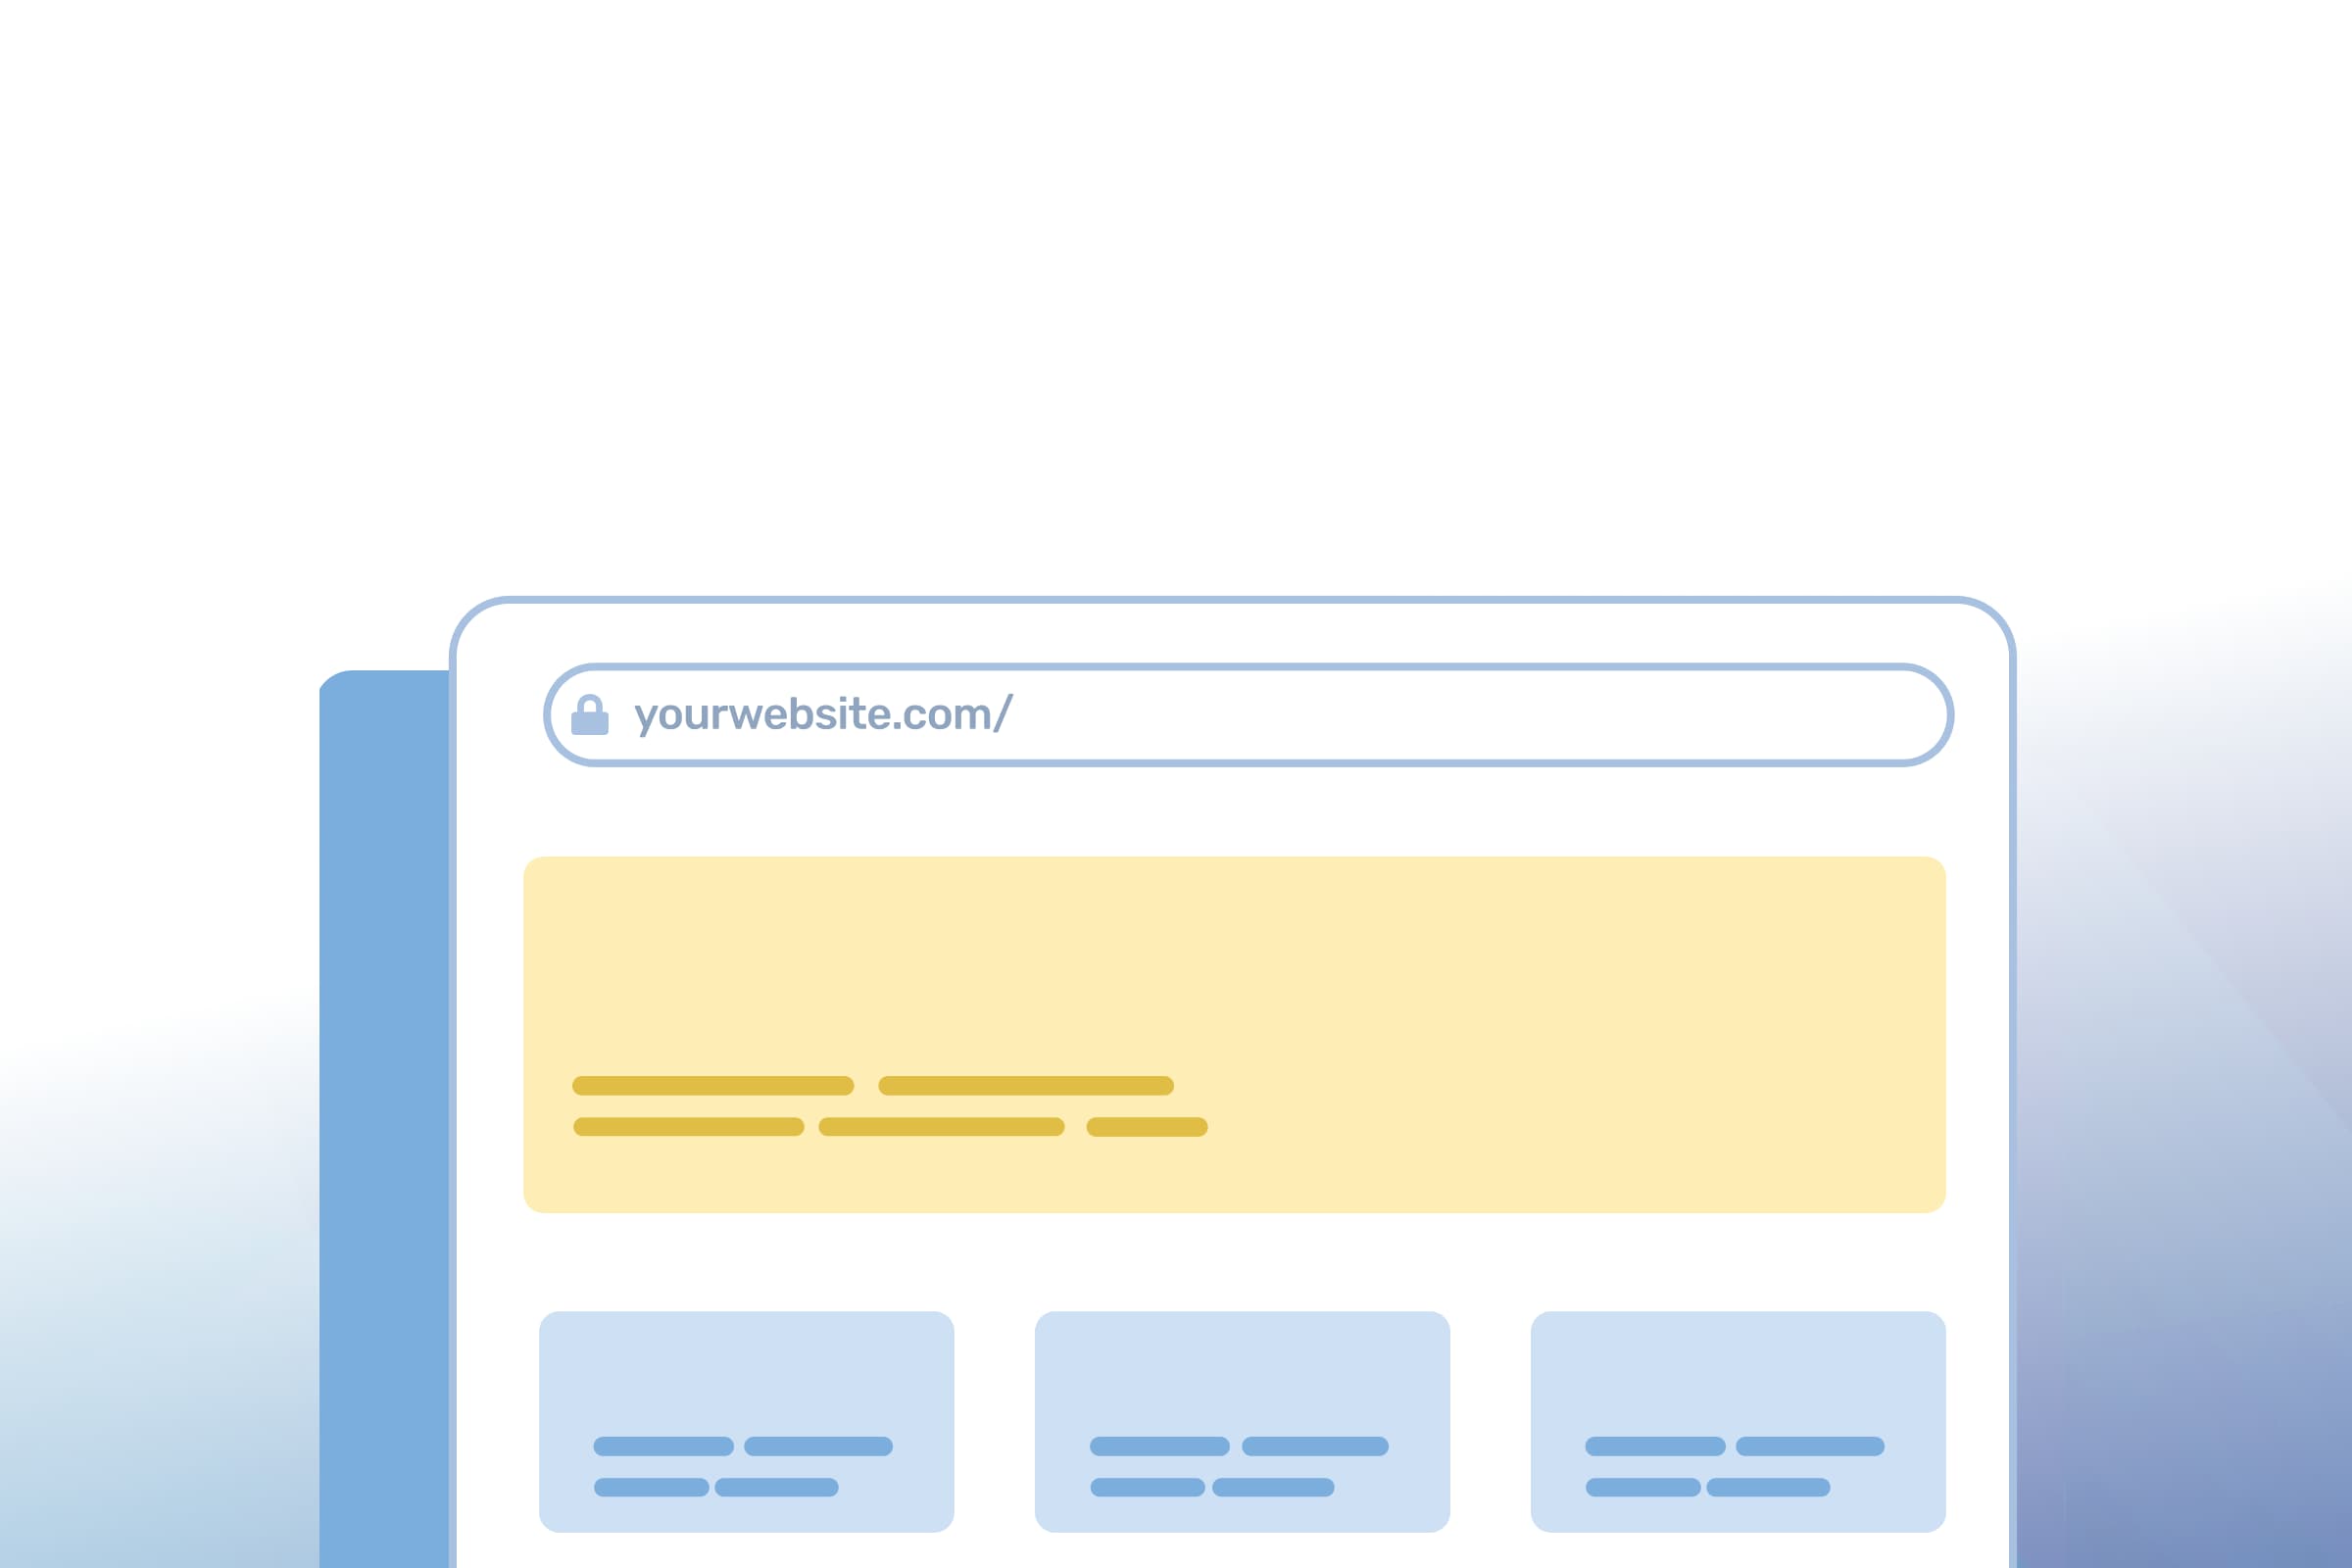 Graphic of a webpage with yourwebsite.com typed into the URL on the standard seoplus+ blue triangle background